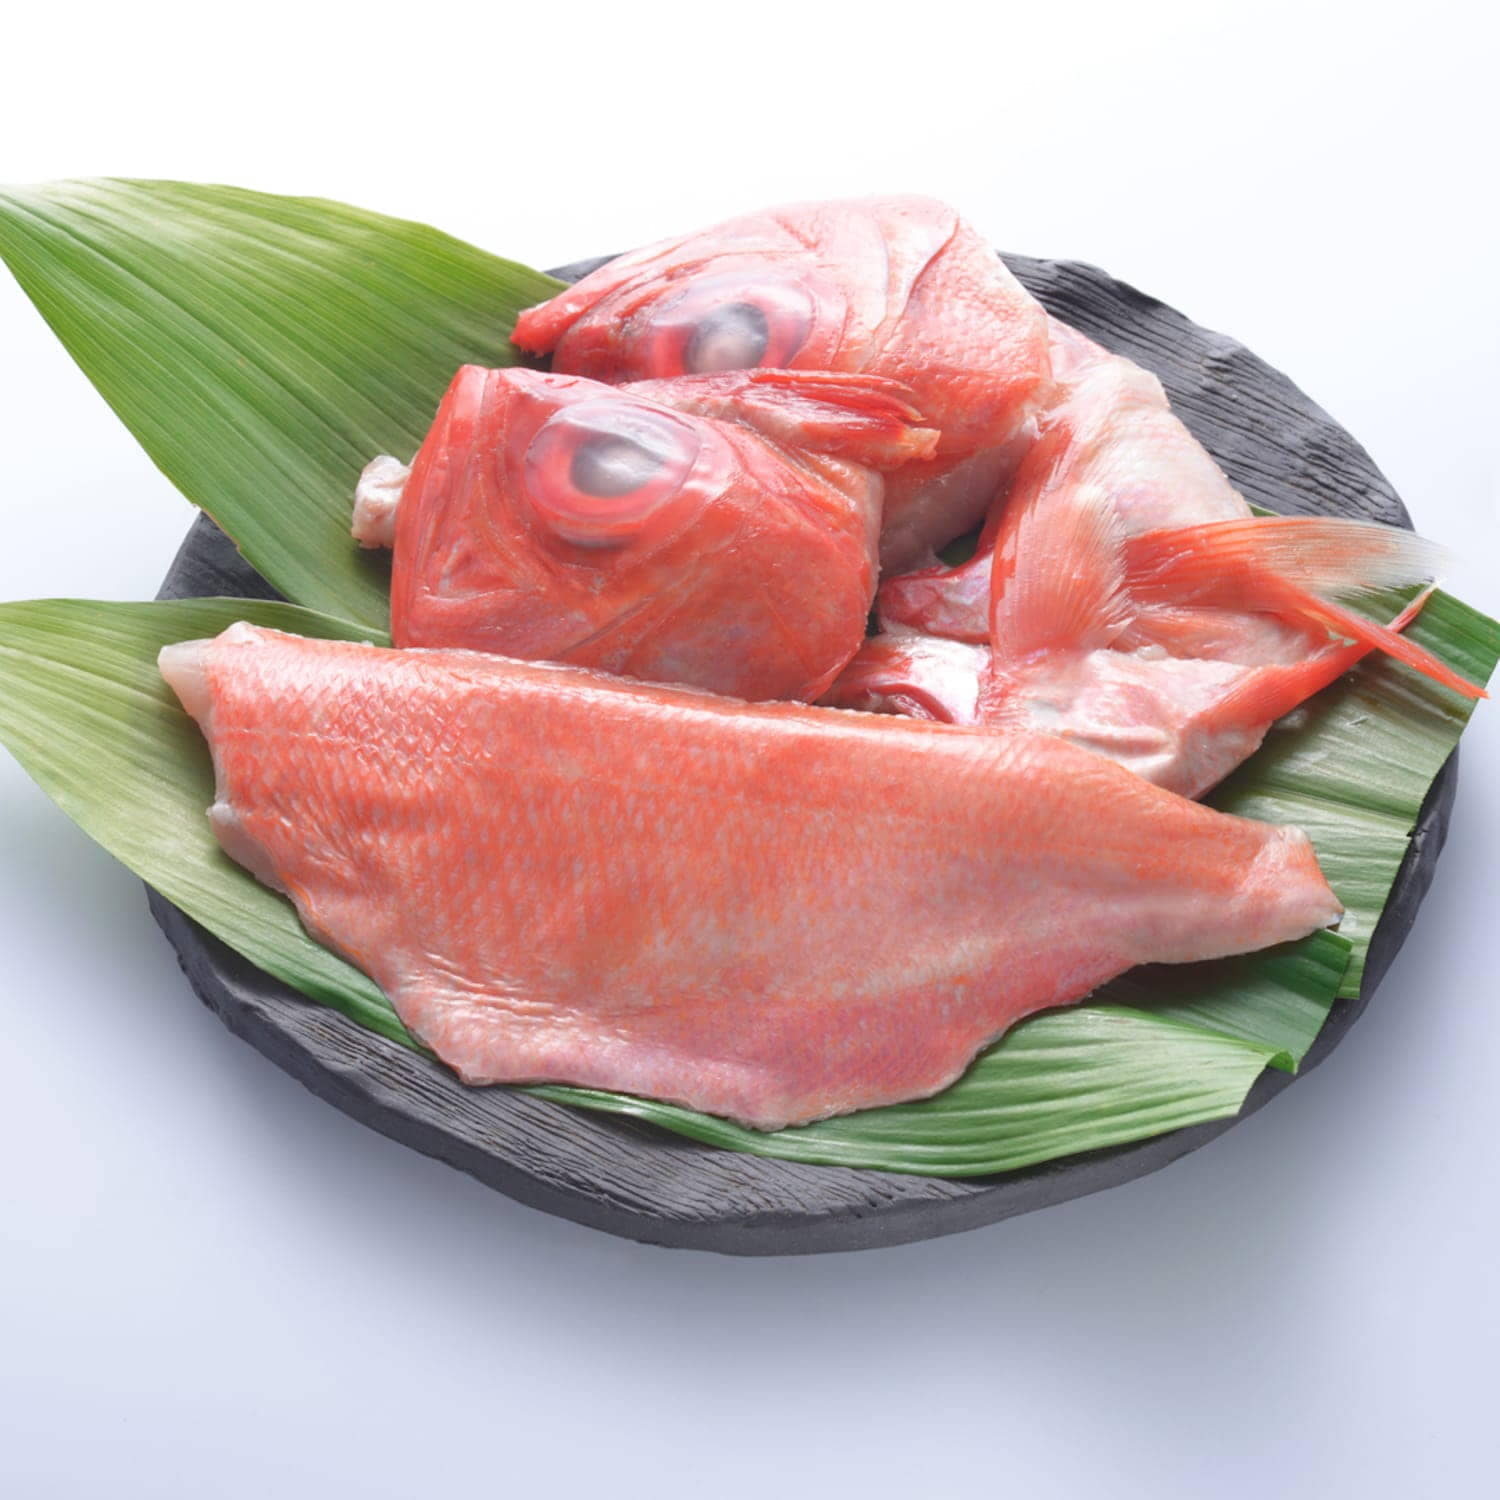 Kinmedai Or Golden Eye Snapper On Ice One Of Popular Fish For Making  Sashimi Japanese Delicacy Of Very Fresh Raw Fish Sliced Into Thin Pieces  Stock Photo - Download Image Now - iStock